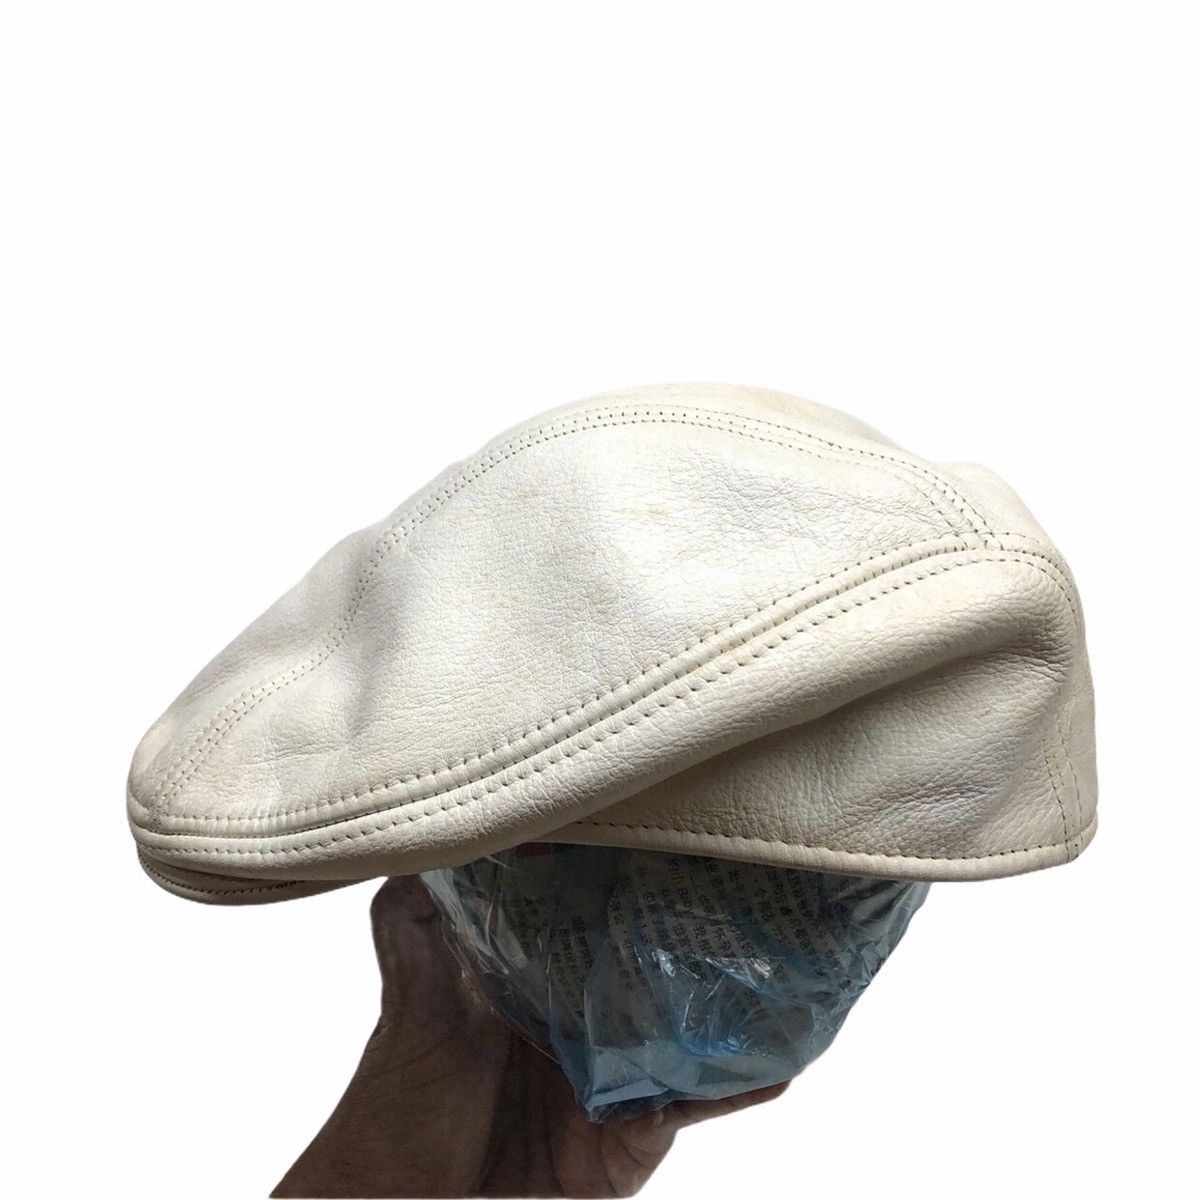 Vintage New York Hat Co. Beret Hat, White Leather Hats Caps Size ONE SIZE - 4 Thumbnail